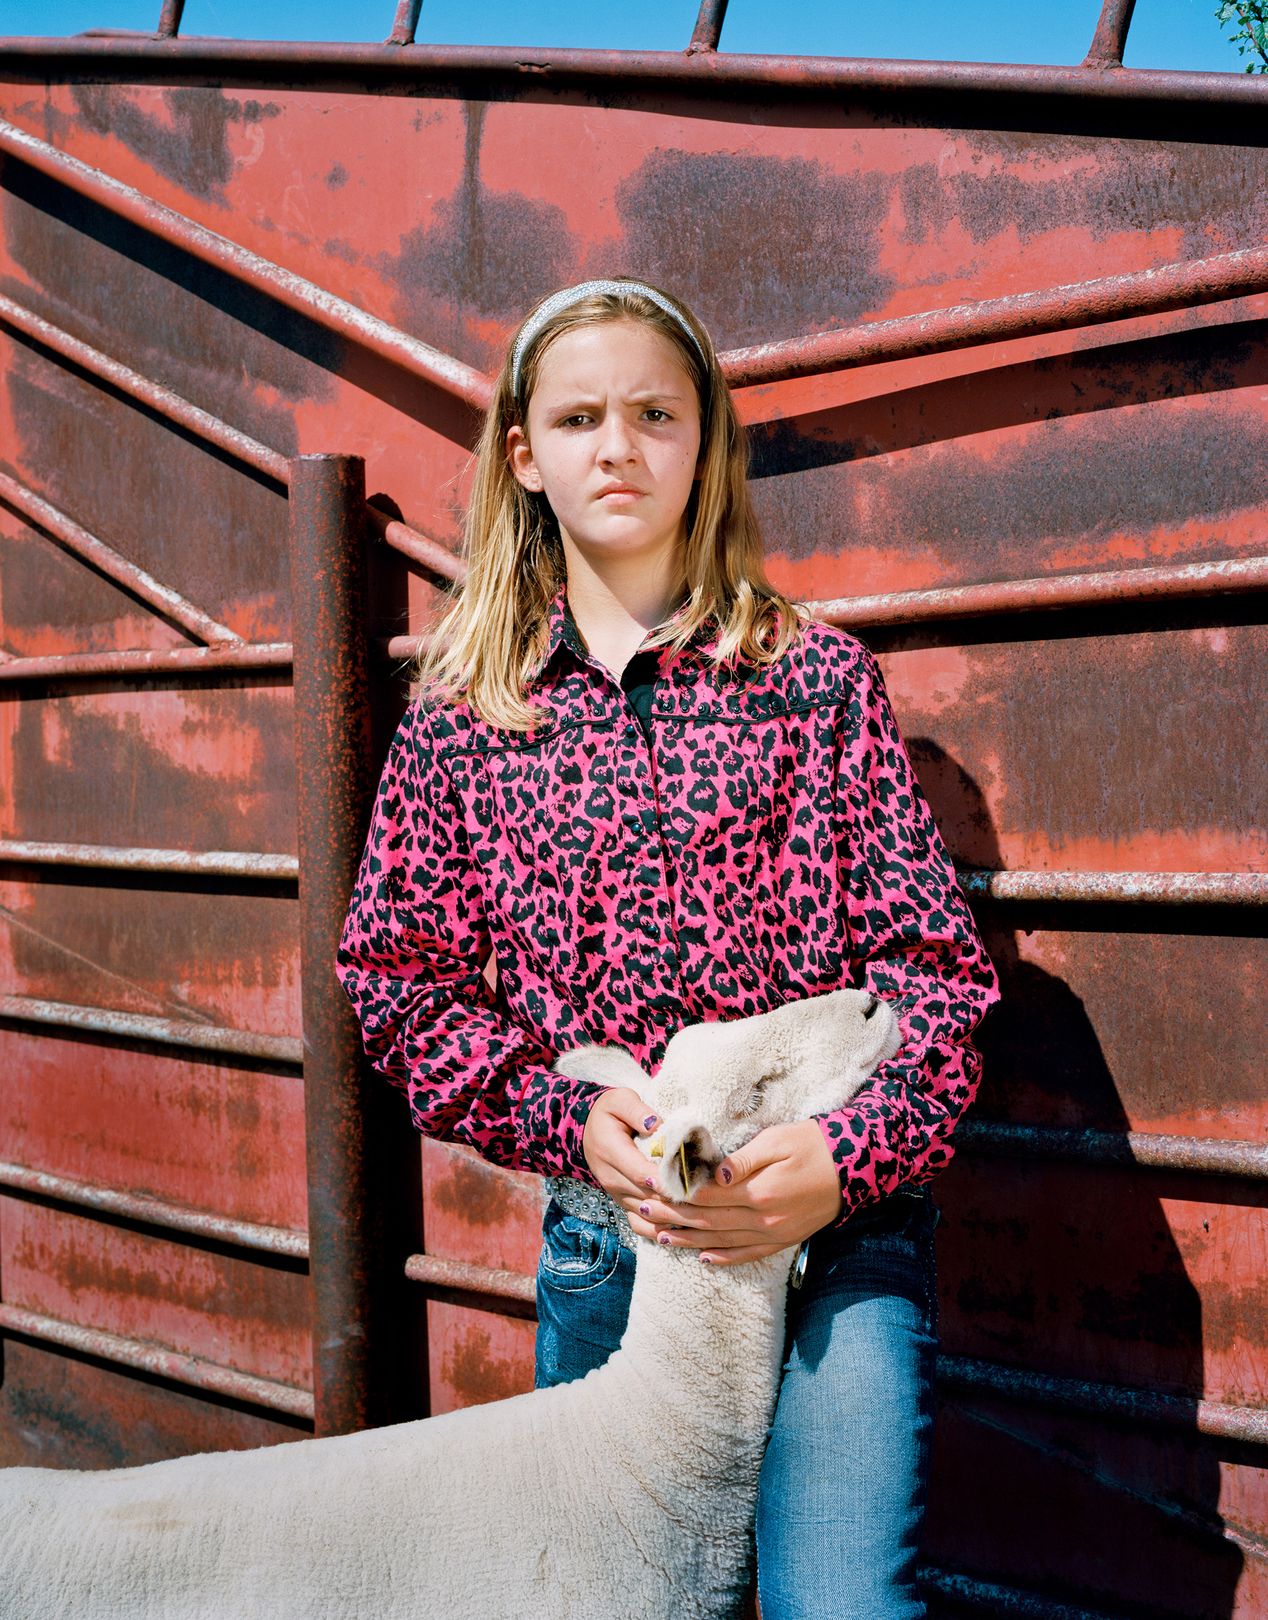 Young cowgirl with her show sheep, environmental portrait photography, Ilona Szwarc, contemporary Los Angeles artist.